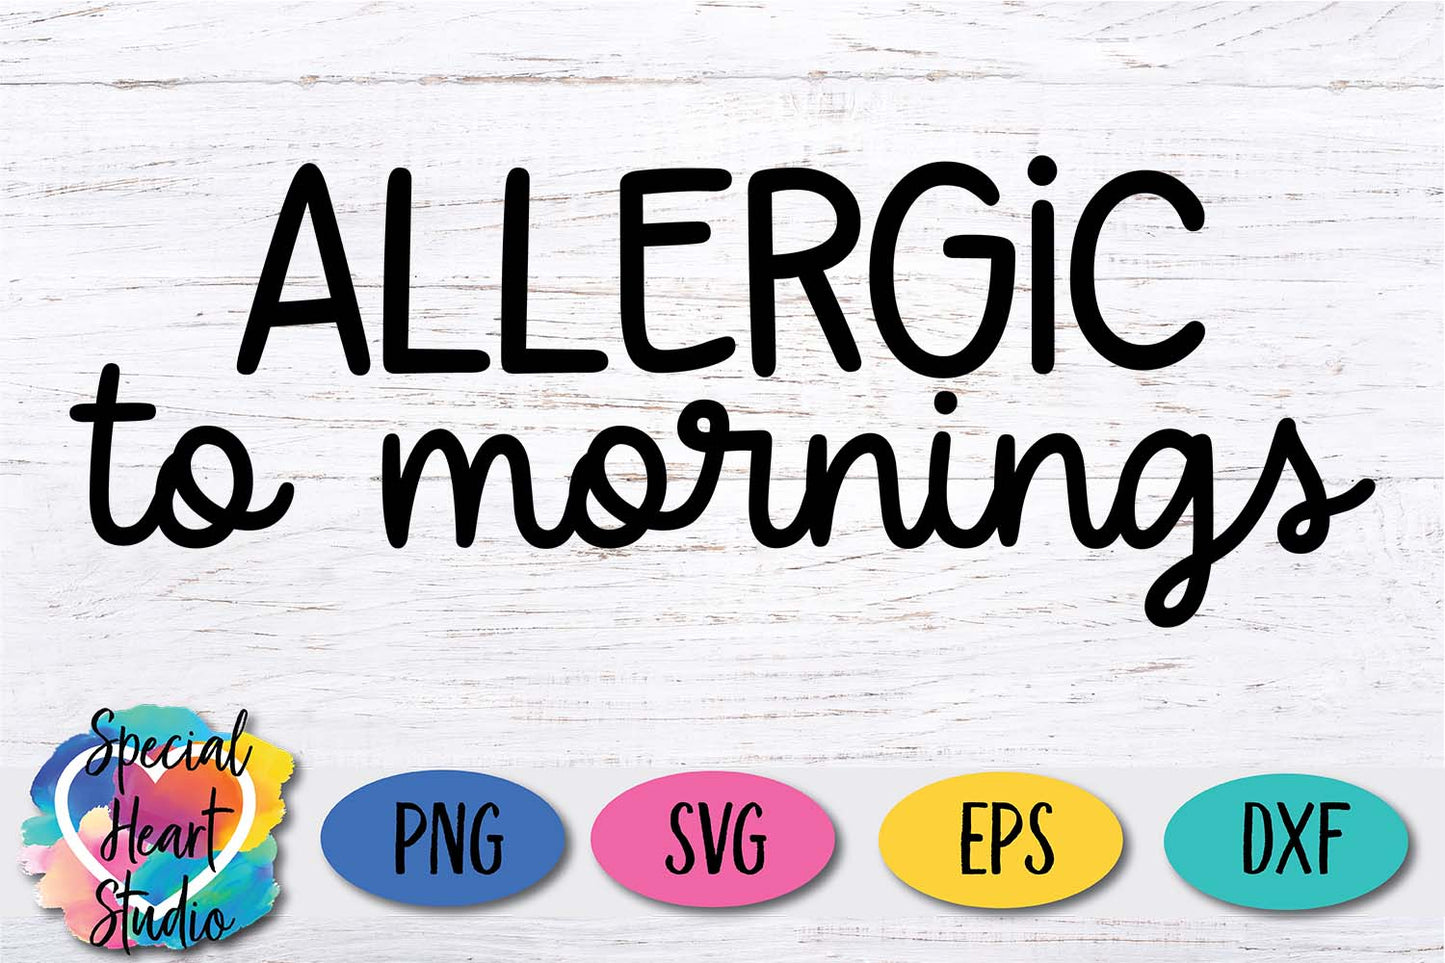 Allergic to mornings